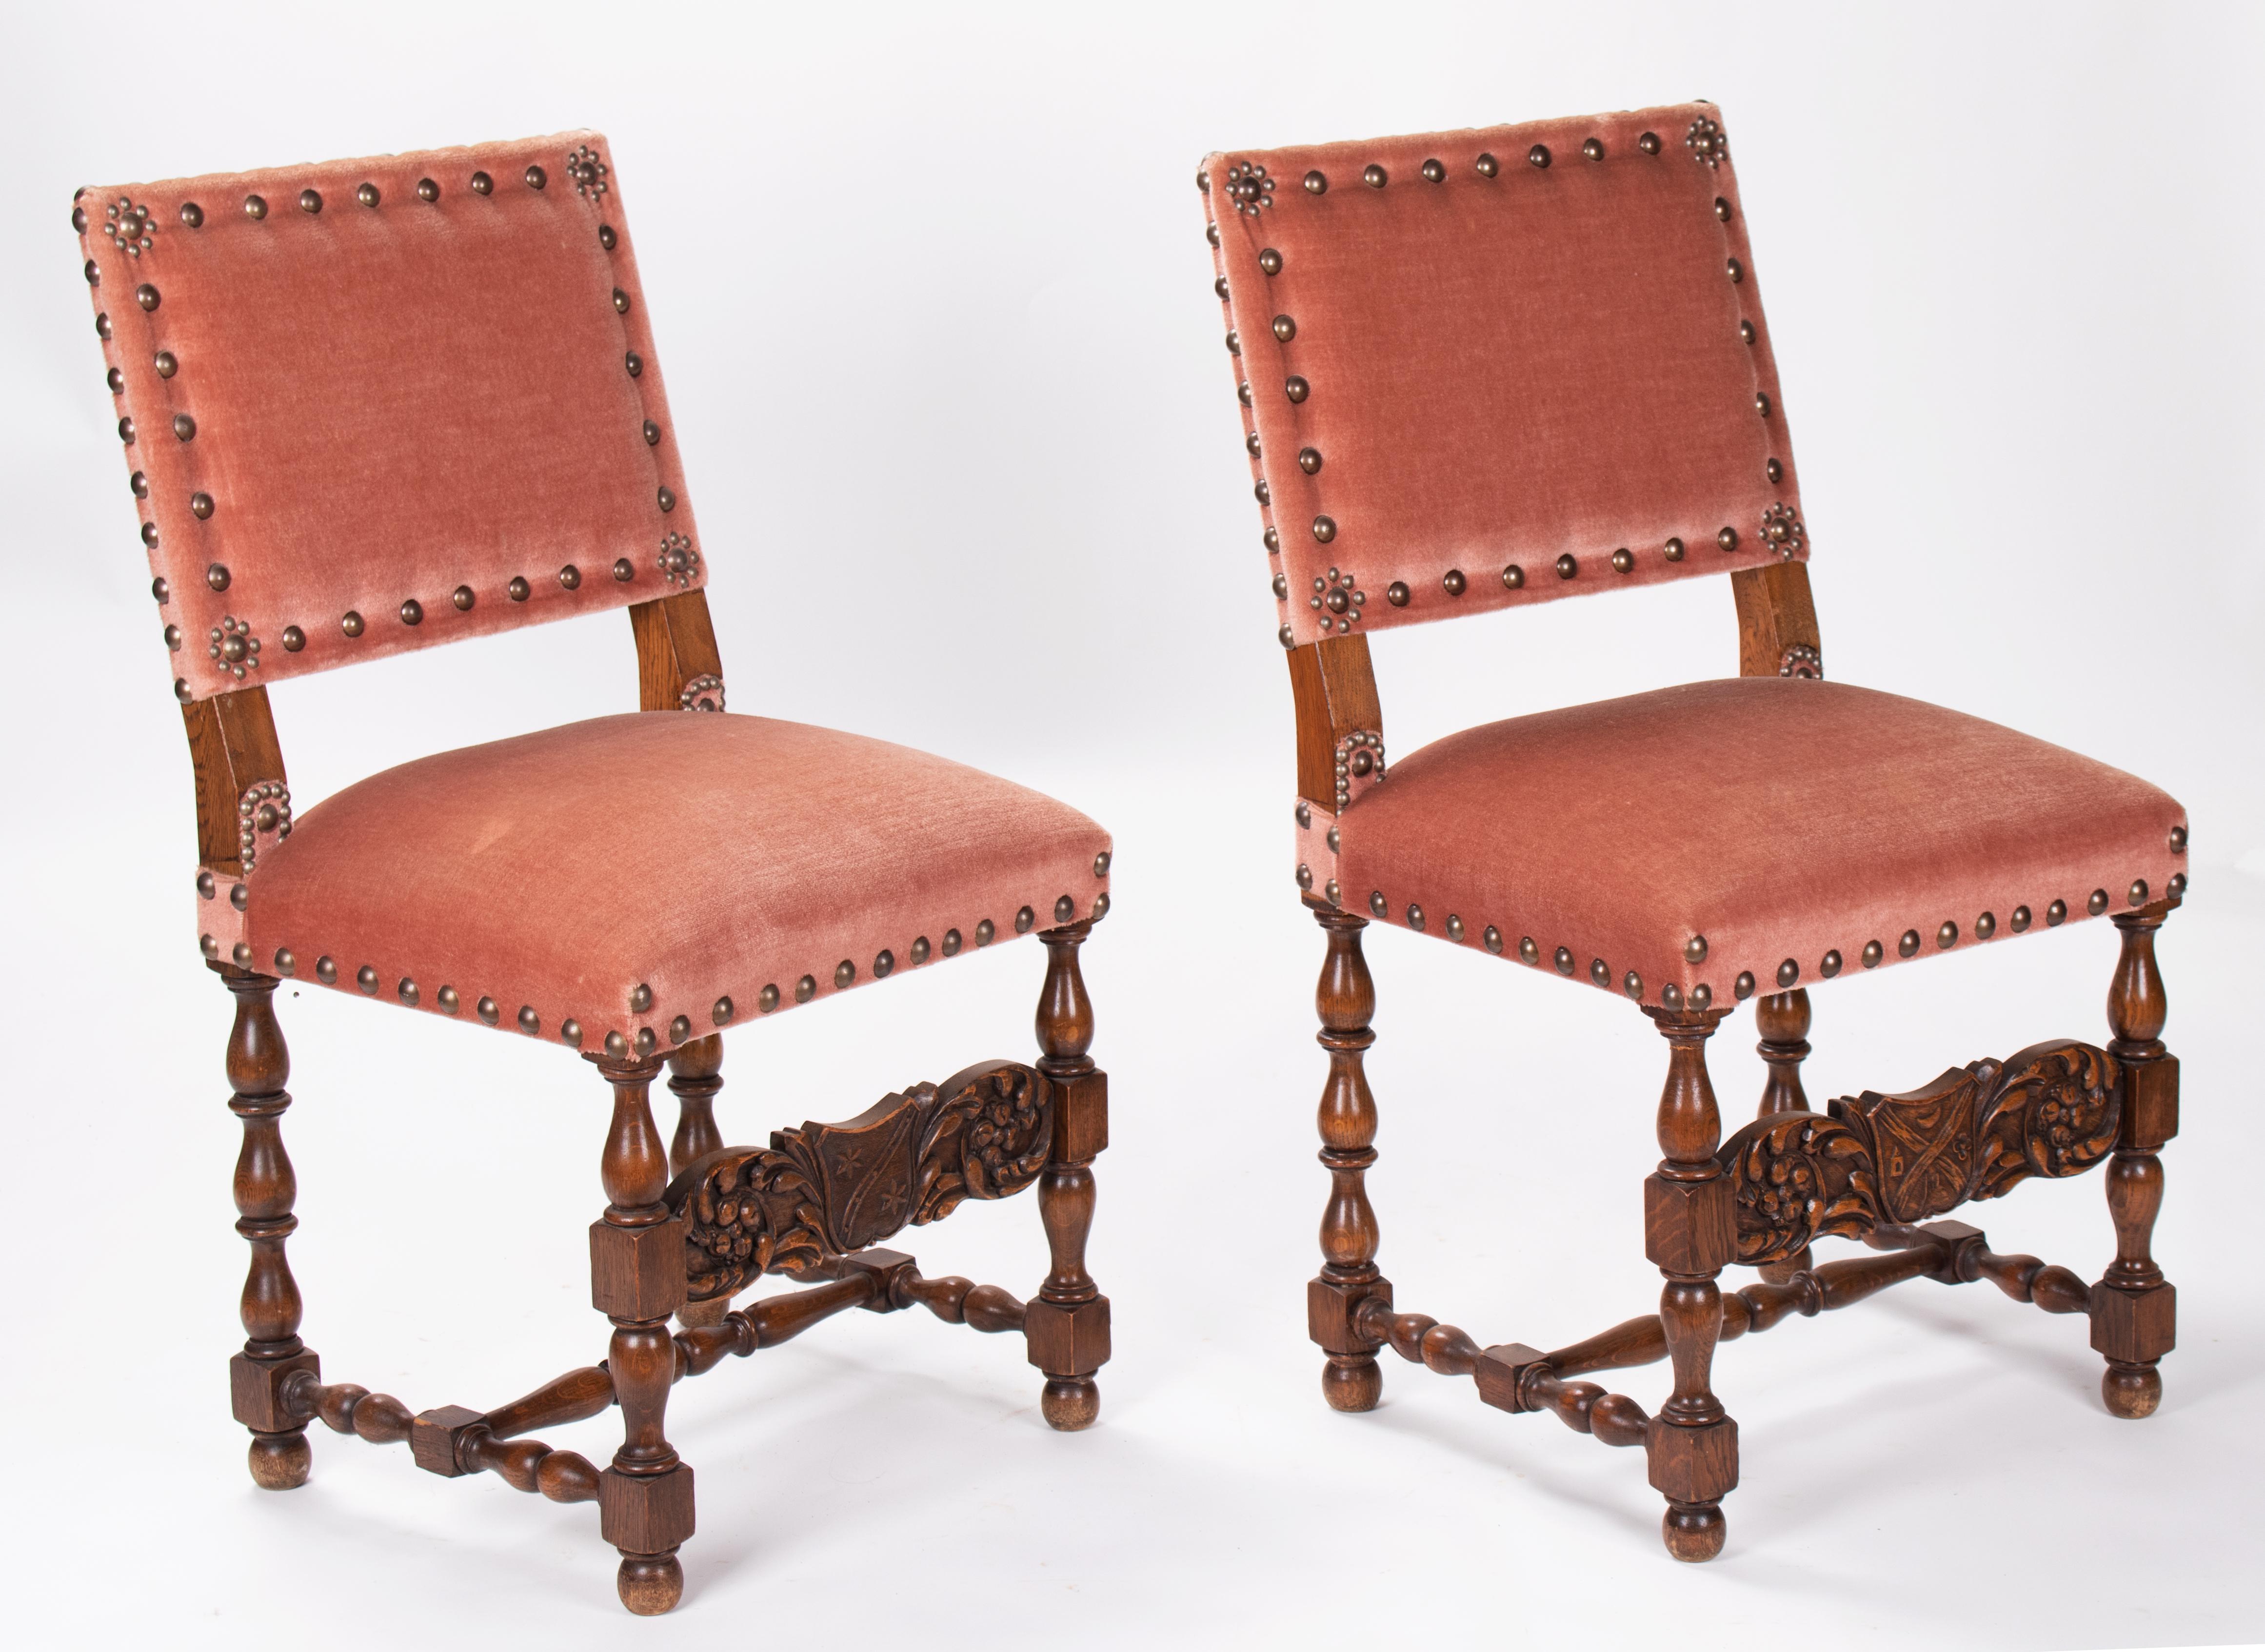 19th century pair of French wooden chairs upholster in velvet with a coat of arms hand carved on the frontal cross beam. 

 